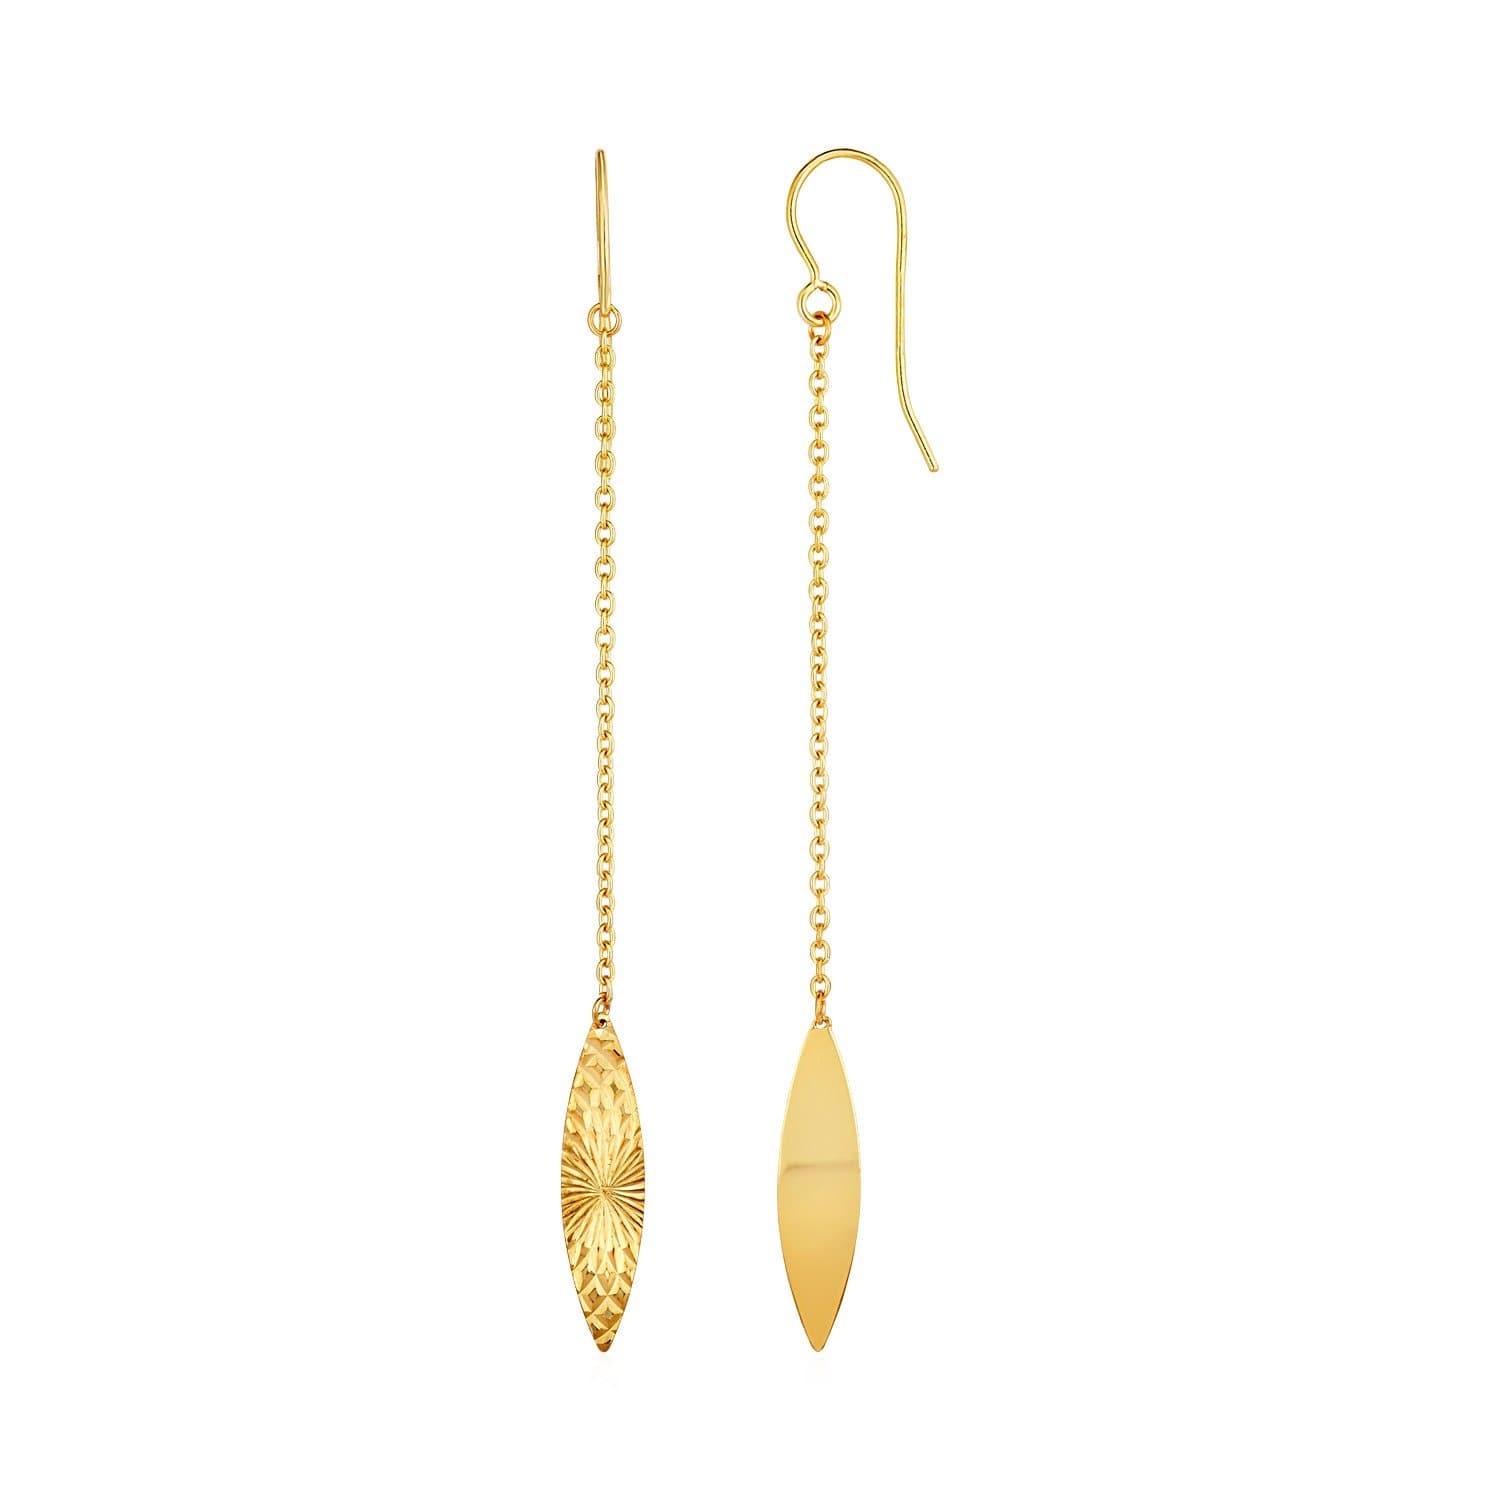 Textured Marquise Shaped Long Drop Earrings in 14k Yellow Gold